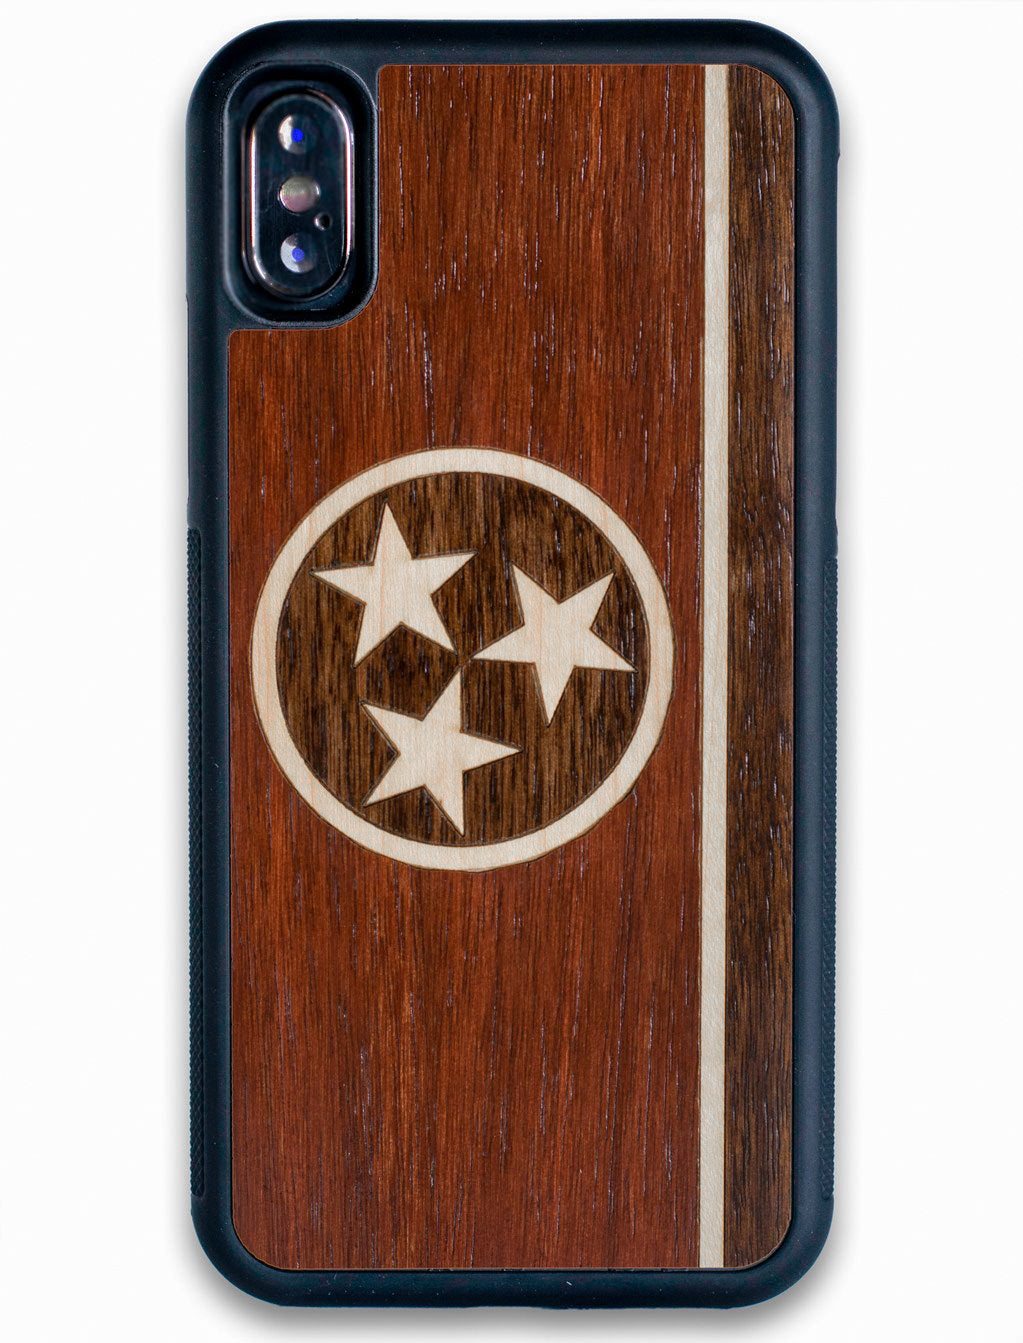 Tennessee flag wooden iPhone X case